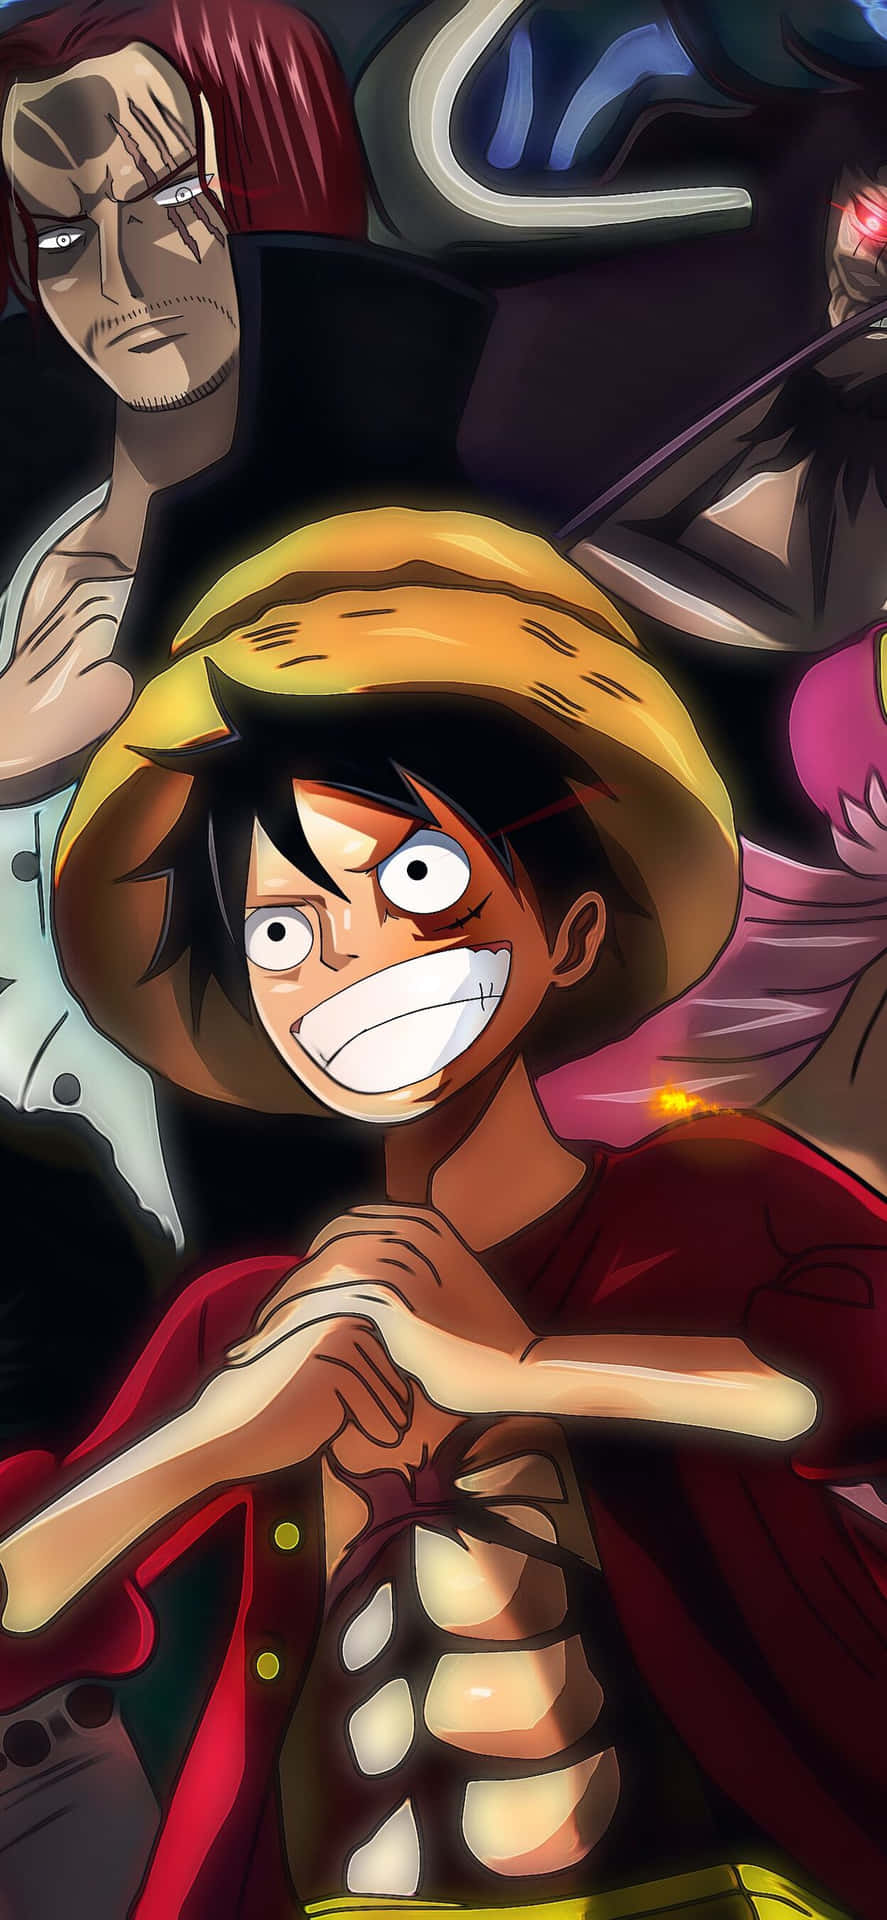 Epic Luffy In Command, One Piece Glory Wallpaper